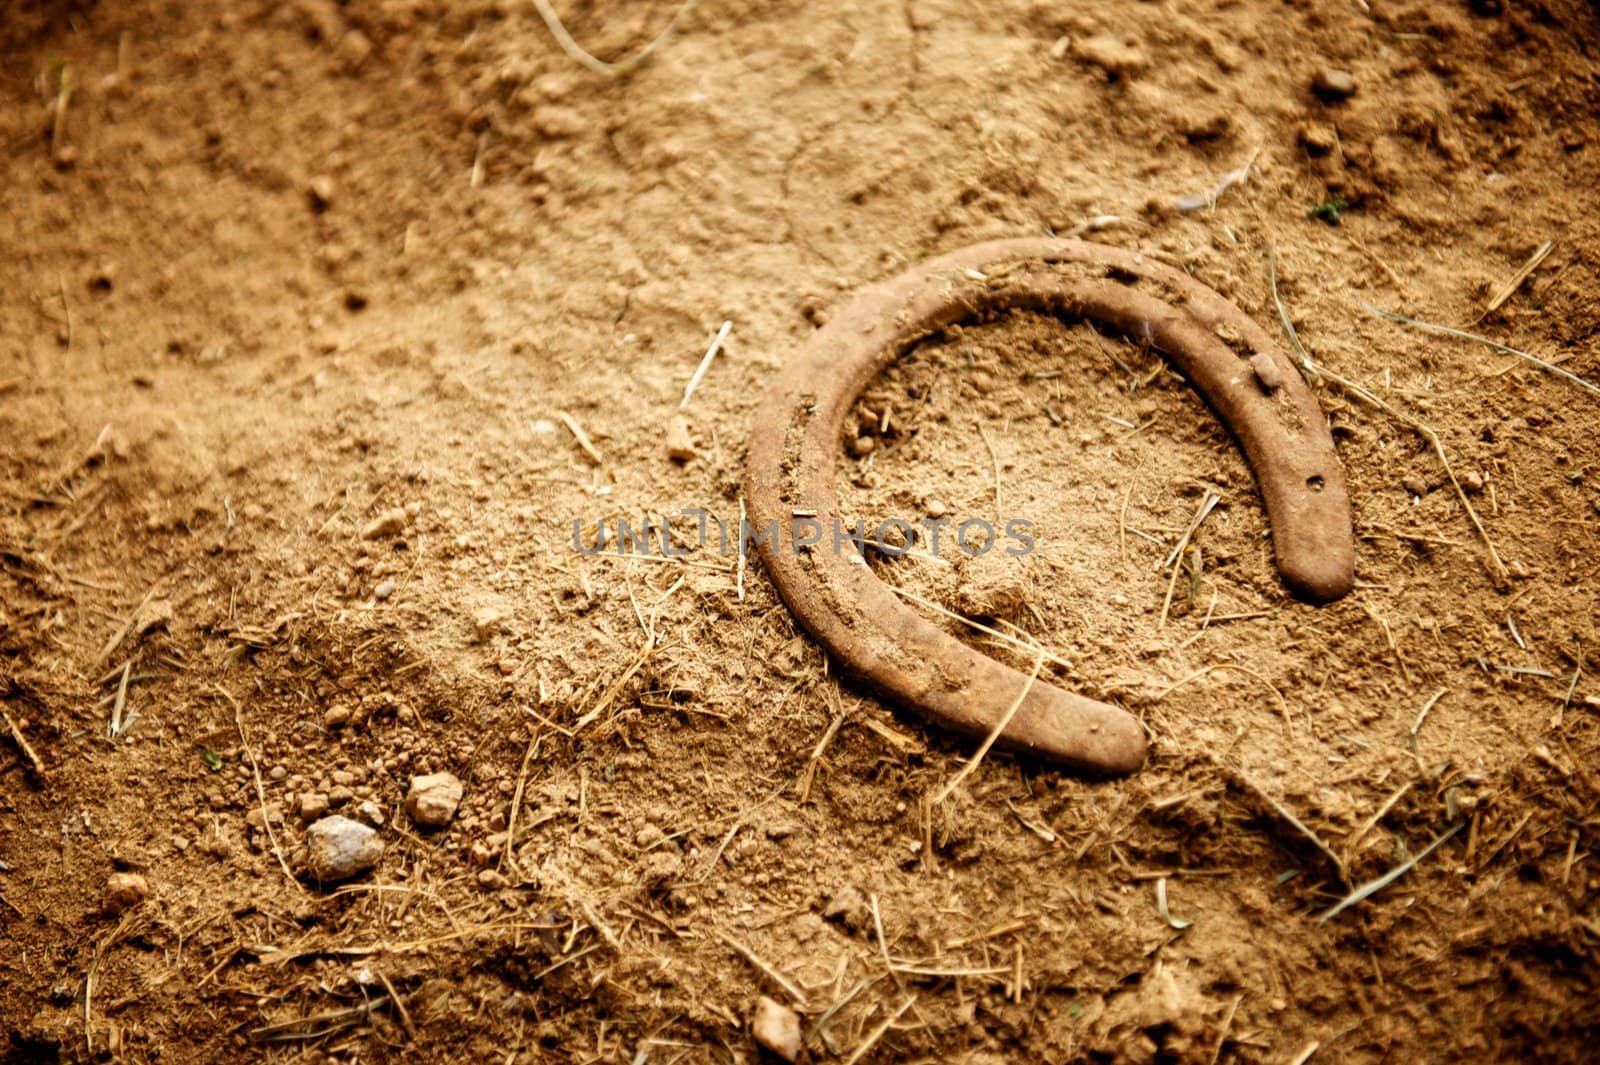 Rusty Old Horse Shoe Lying in Dirt by pixelsnap